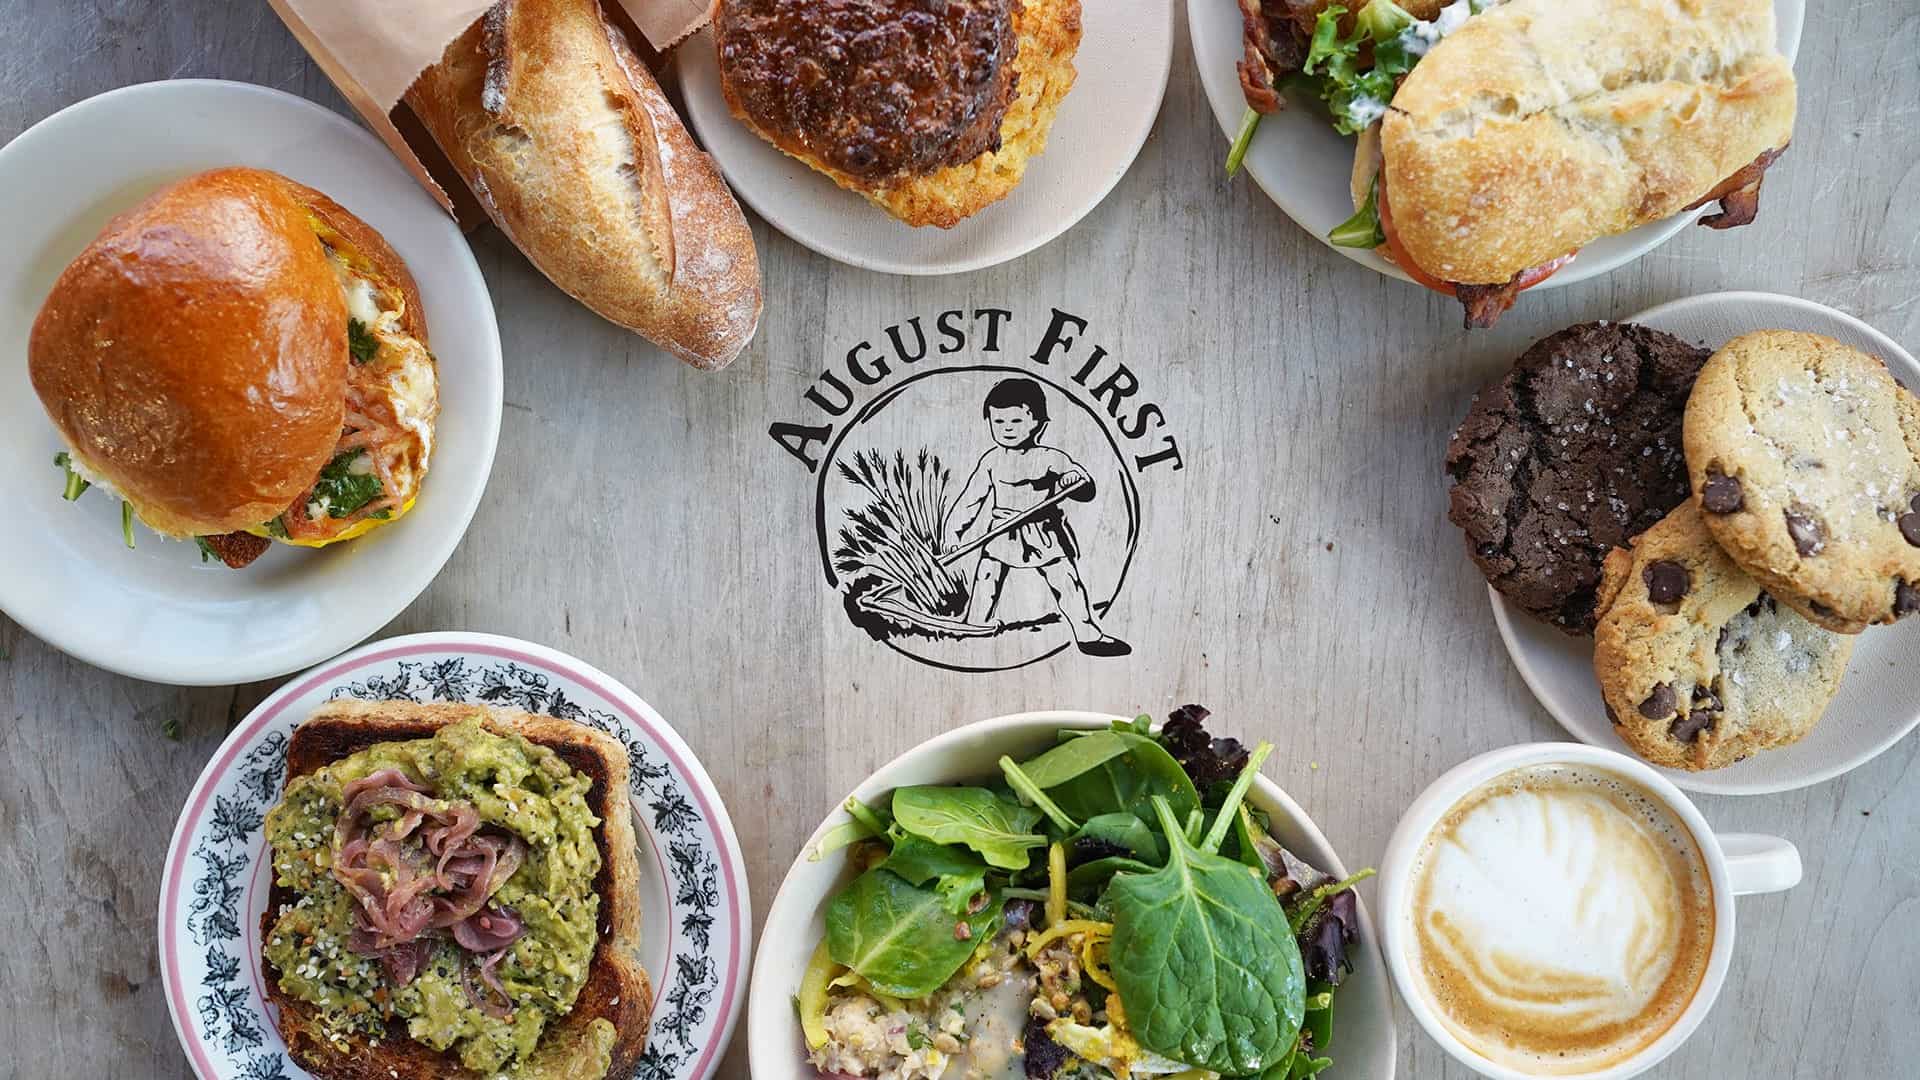 August First - Many Food Dishes with Logo